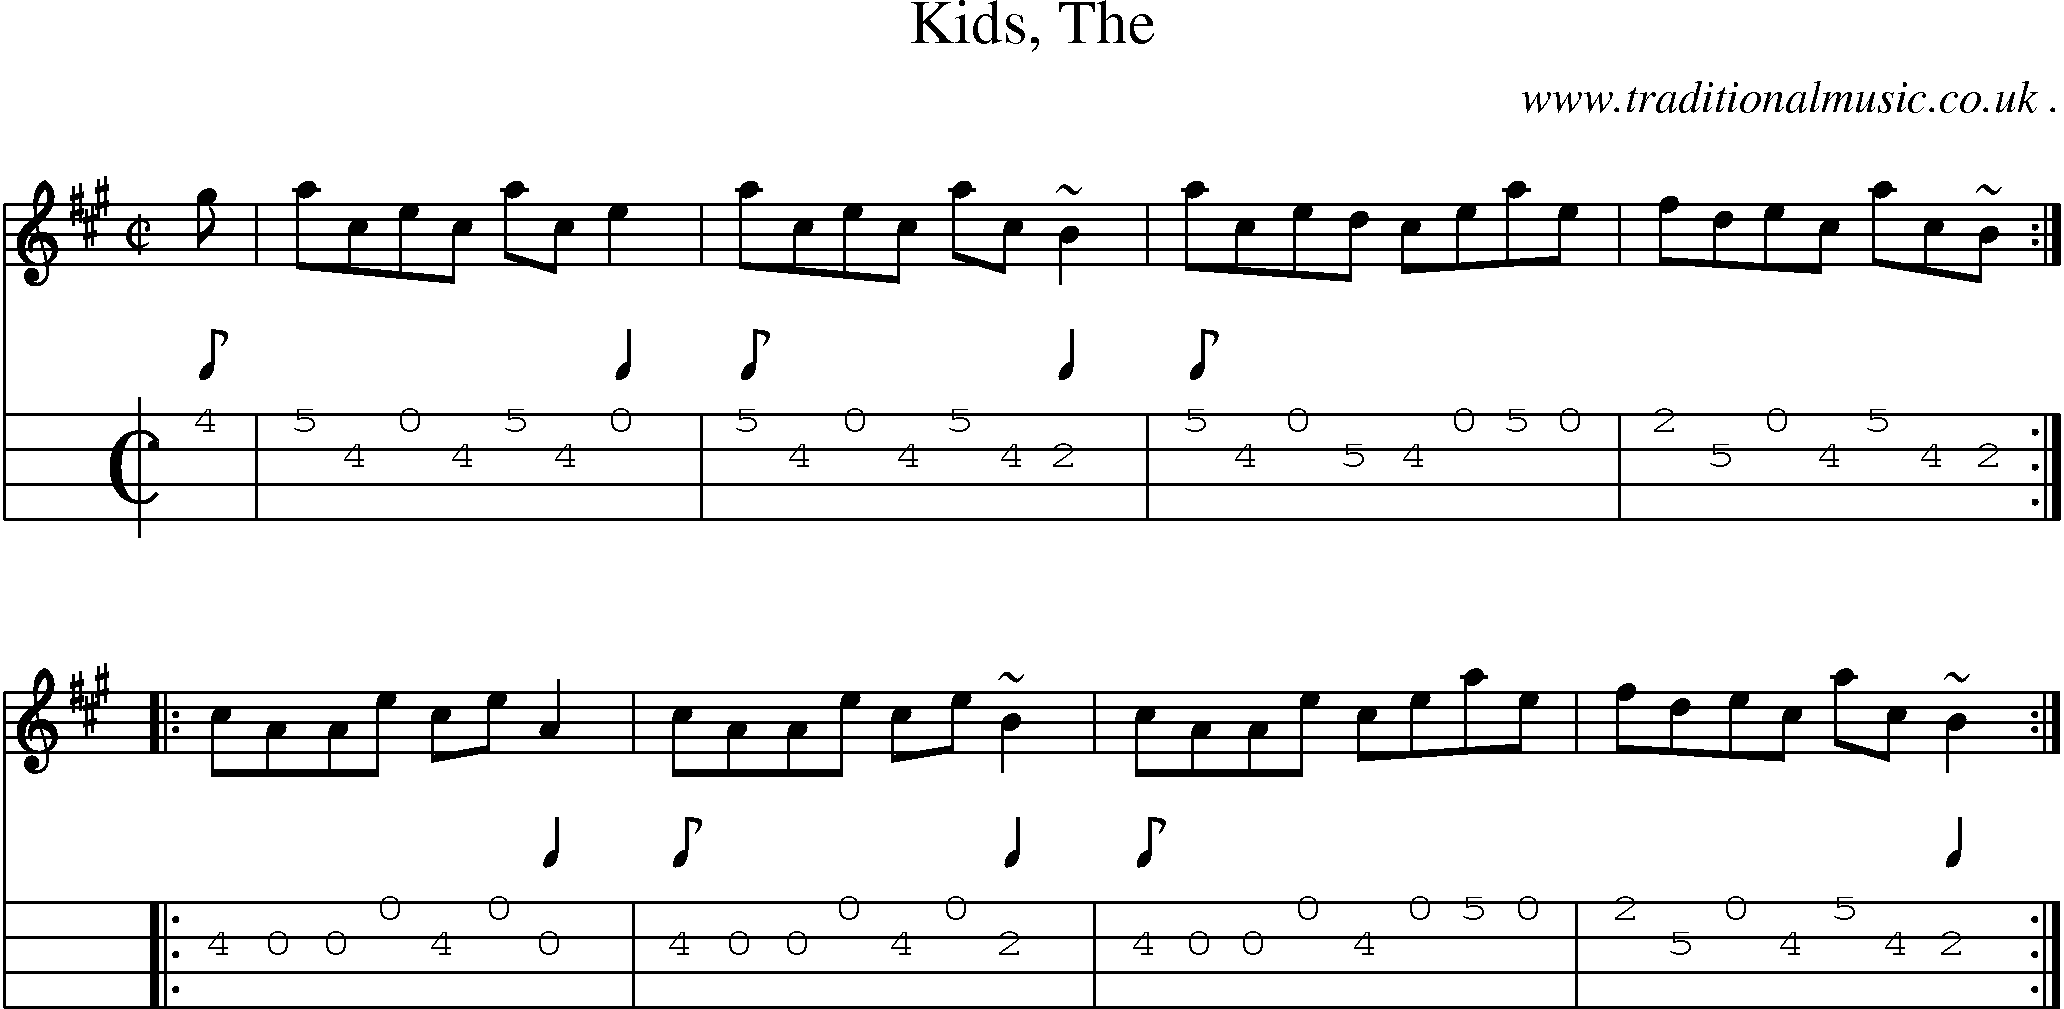 Sheet-music  score, Chords and Mandolin Tabs for Kids The